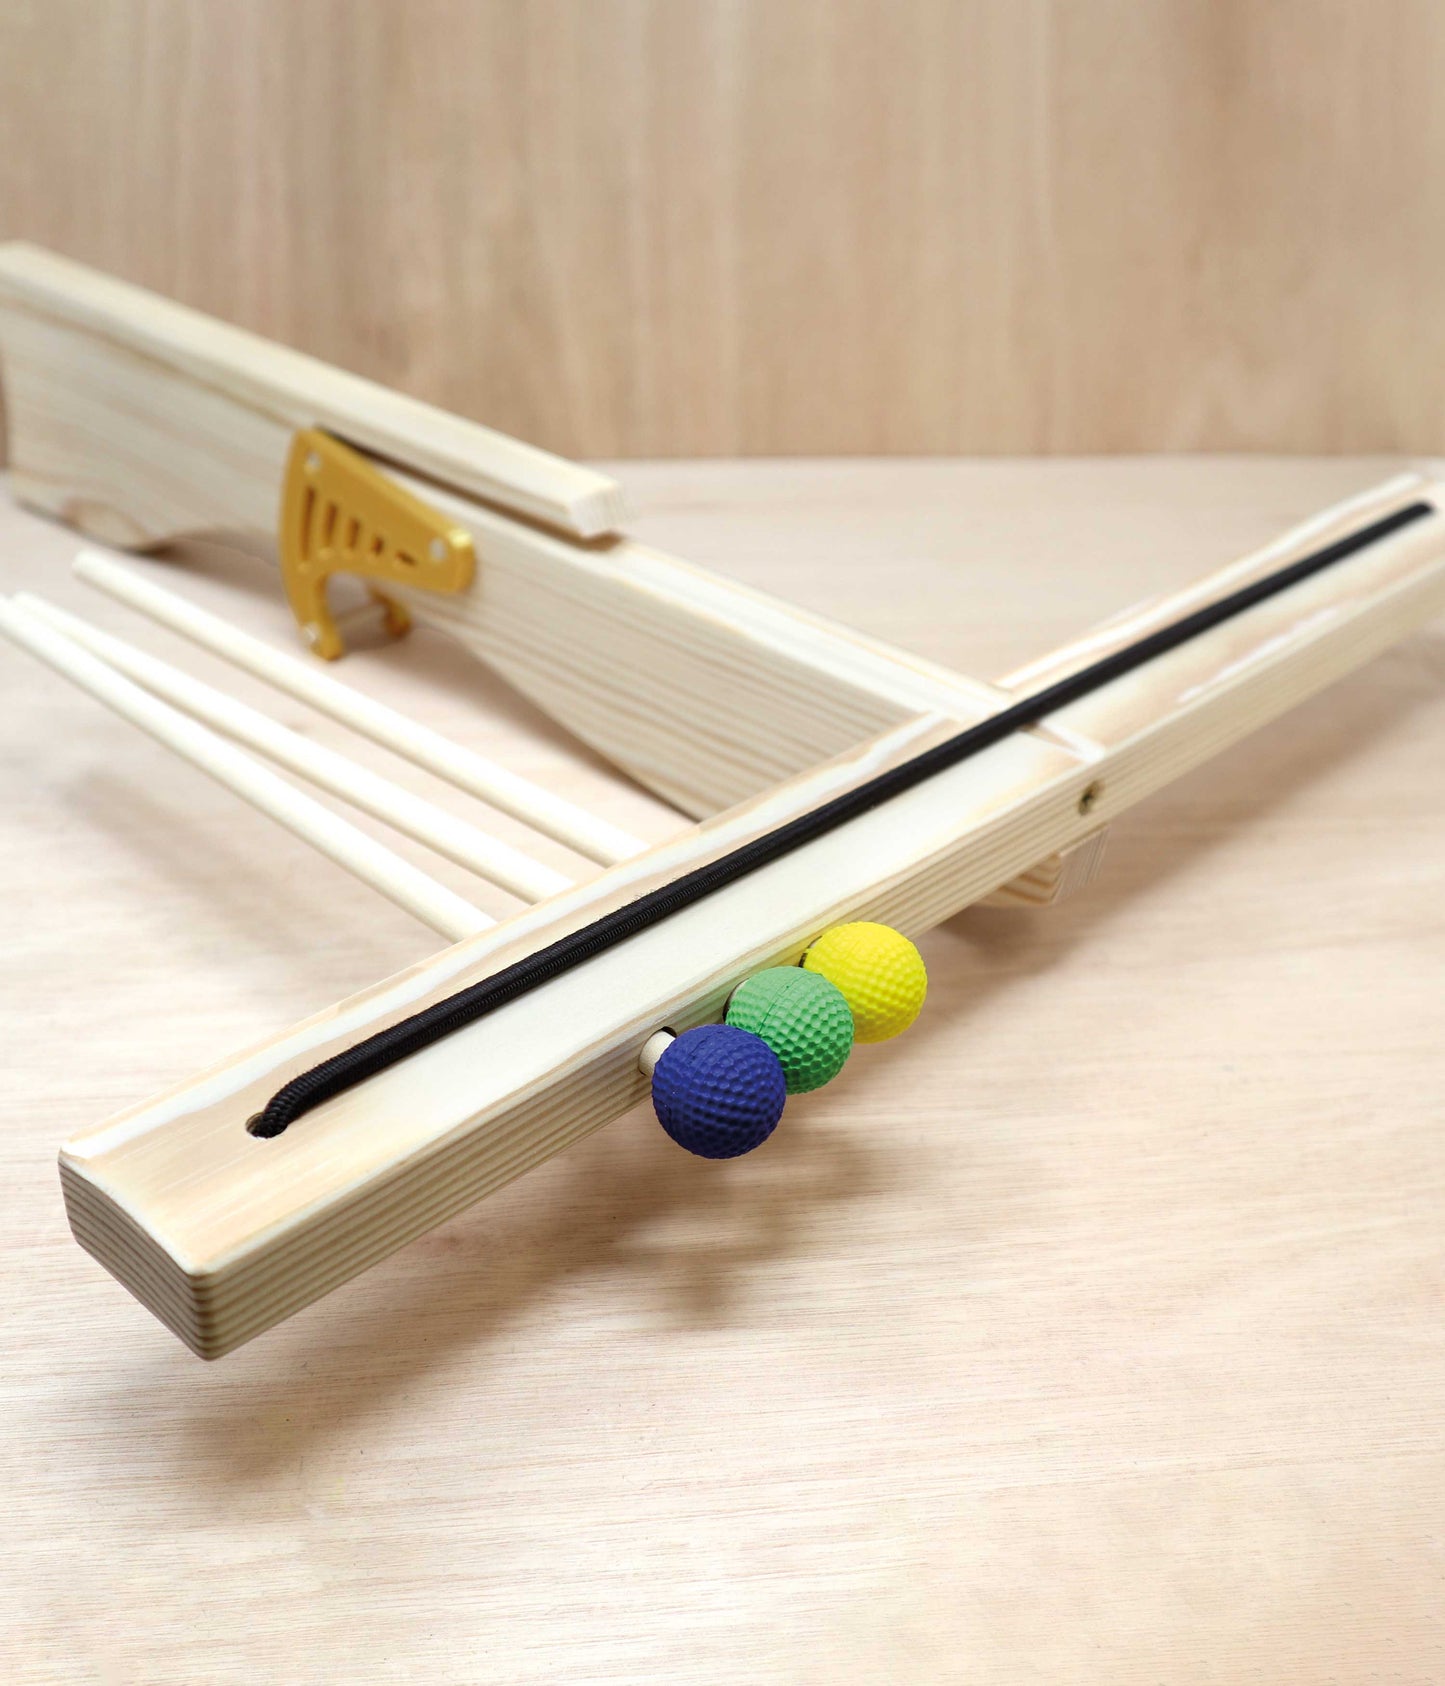 Beginners Woodwork Project Kit – Build a Toy Crossbow